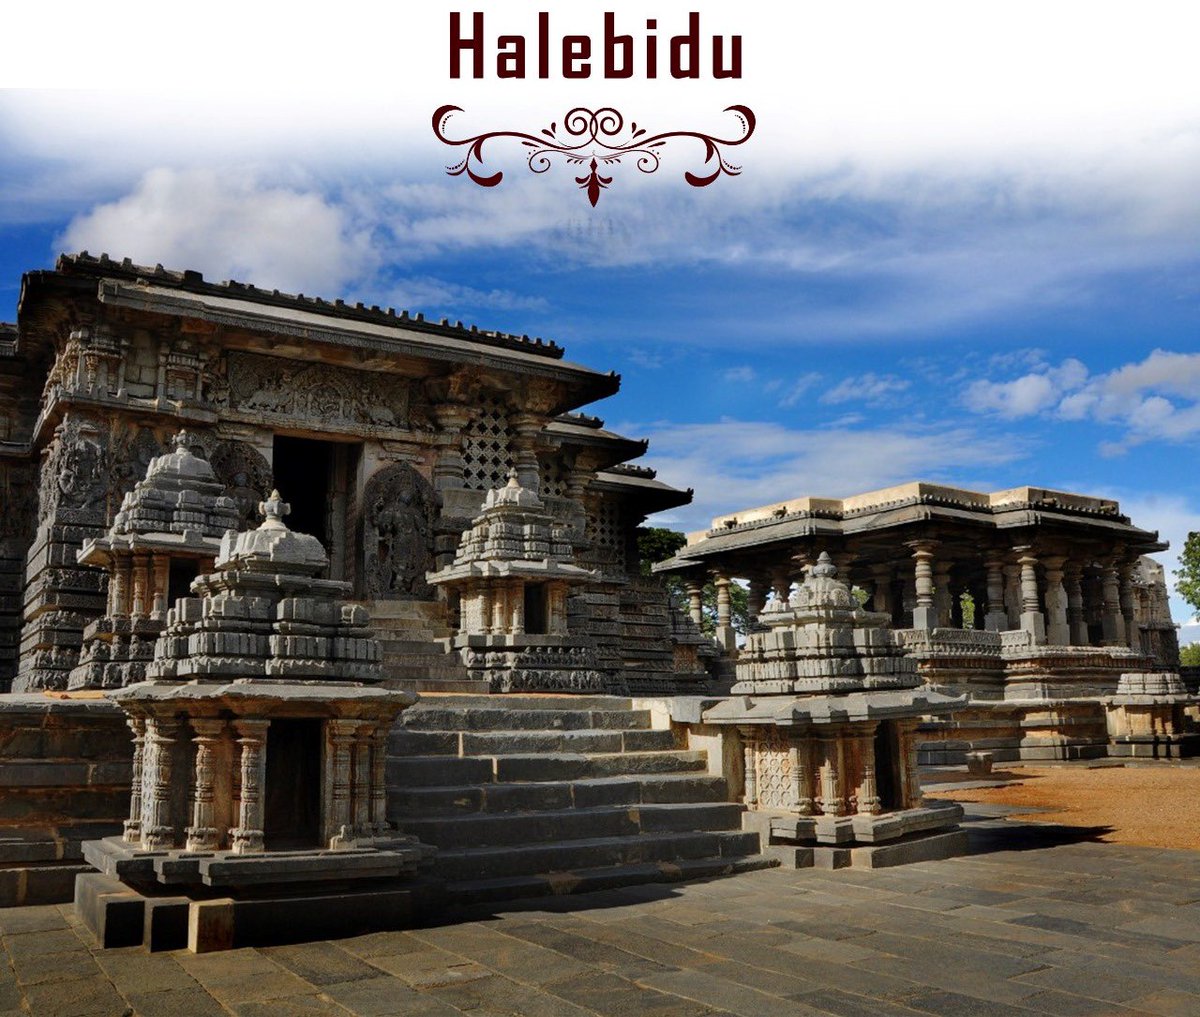 #JustIn: K'taka gets its 4th #UNESCO heritage site as the @UNESCO approves #India's recommendation of 'Sacred Ensembles of the Hoysalas' at Belur, Halebidu & Somanathpur as new addition to the list of #WorldHeritageSites. @TOIBengaluru #Karnataka #Tradition #Culture #architecture